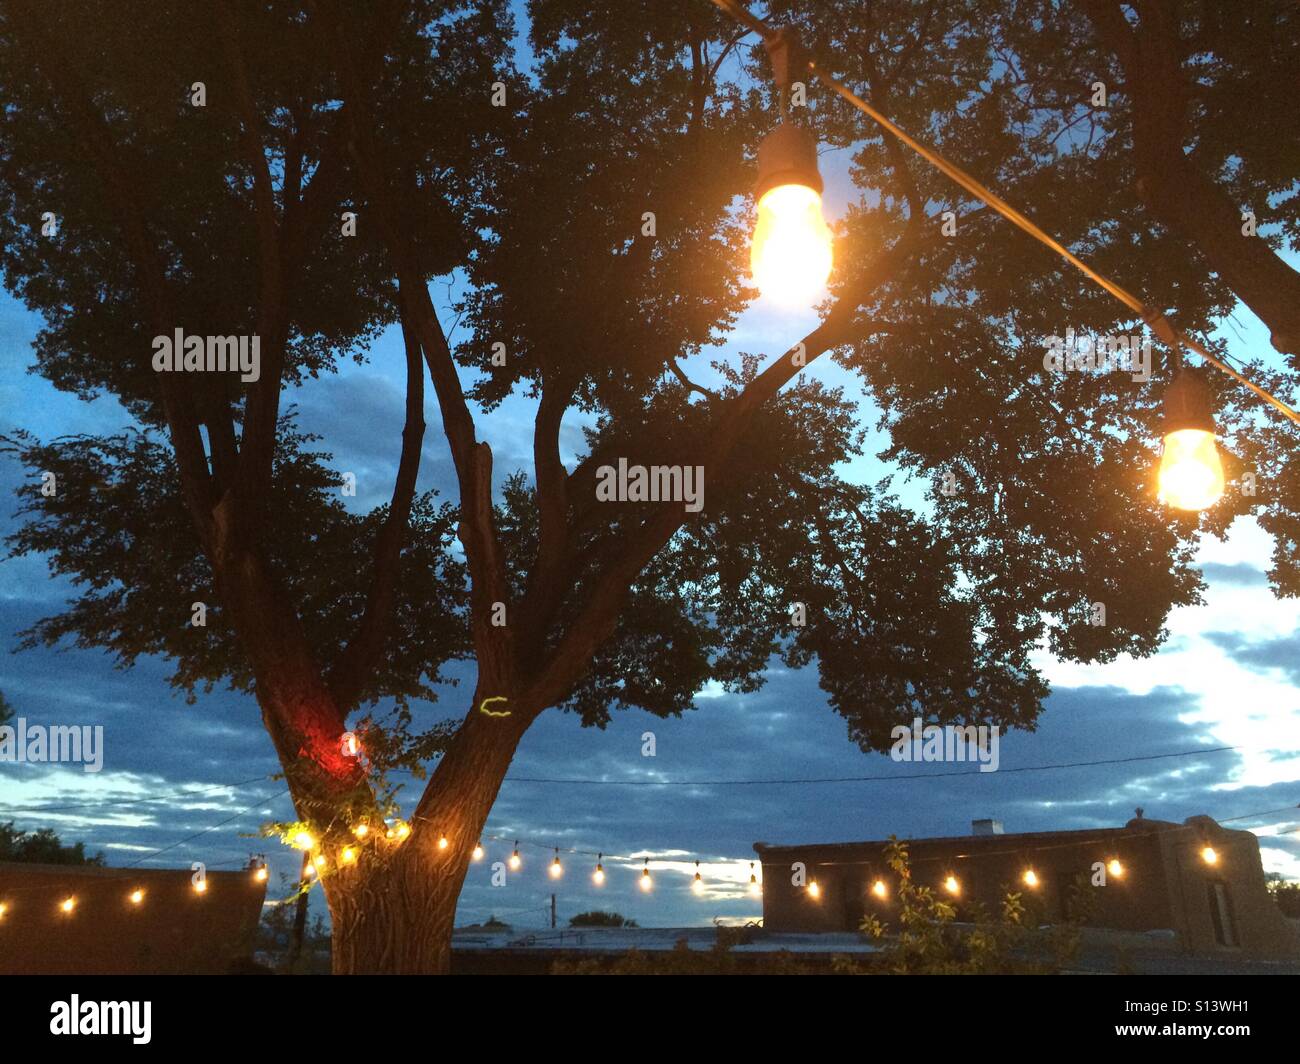 Decorative lights hang in a backyard within evening light. Stock Photo